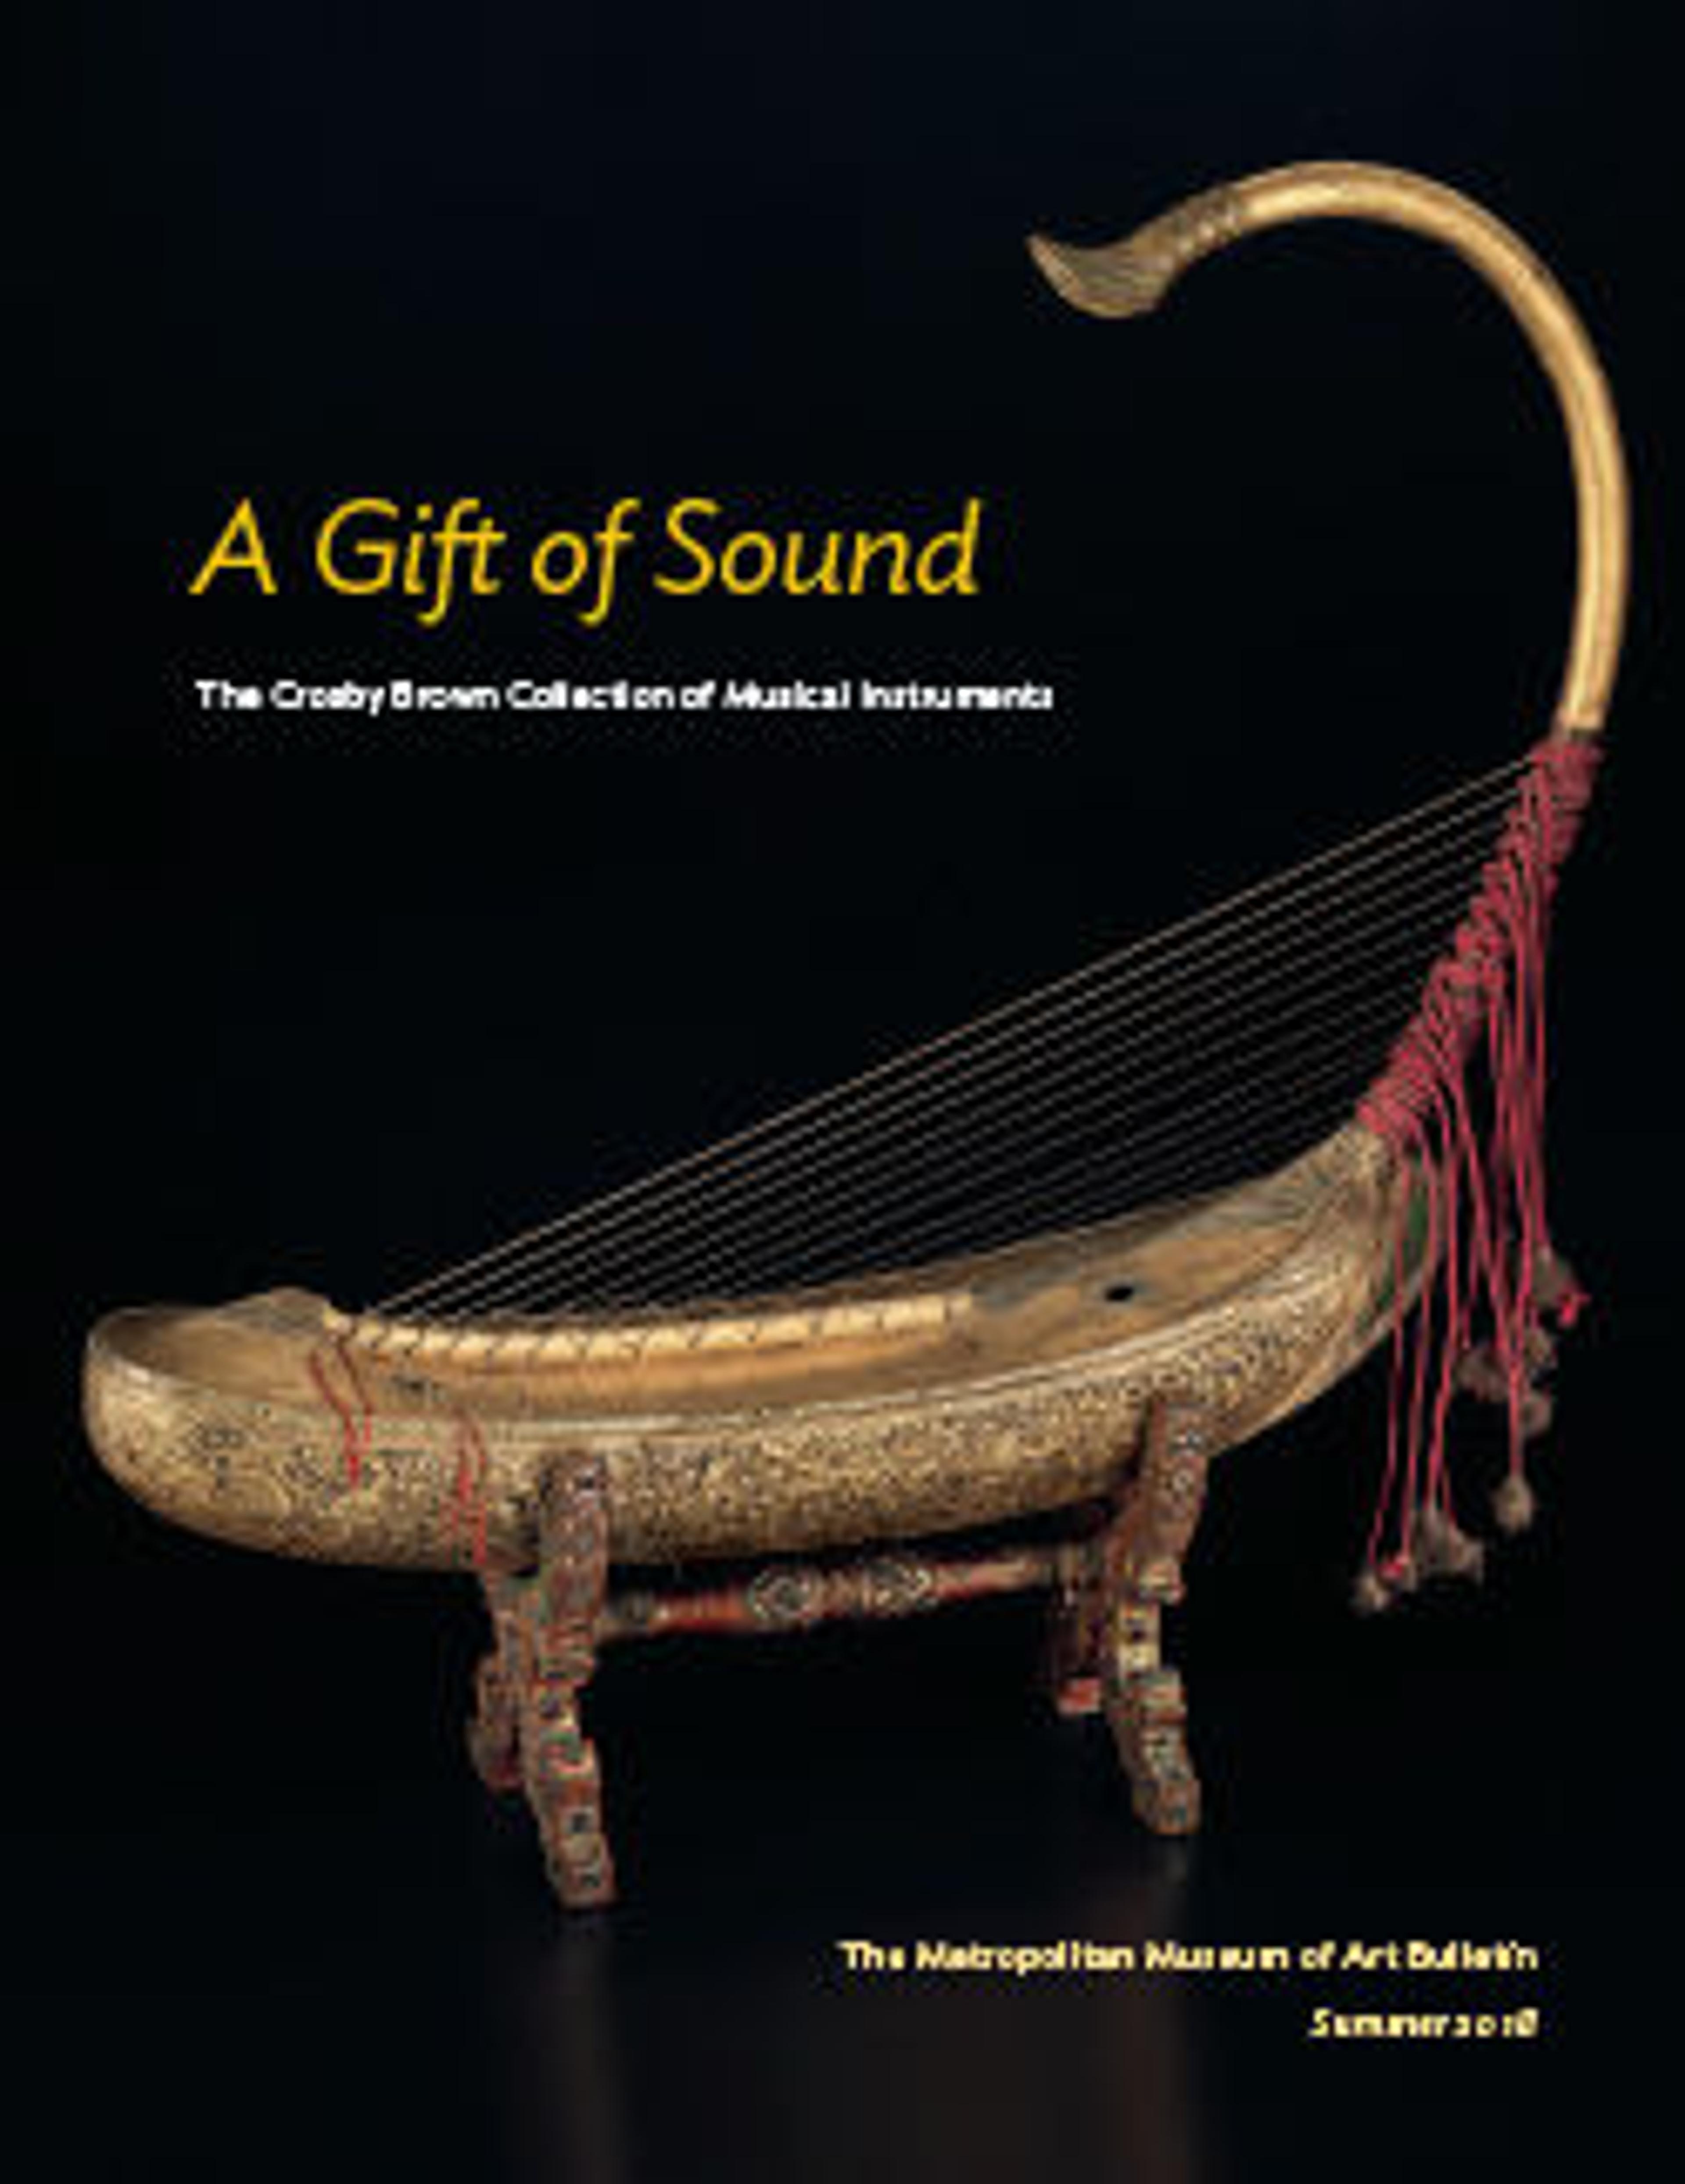 A Gift of Sound: The Crosby Brown Collection of Musical Instruments: The Metropolitan Museum of Art Bulletin, v.76, no. 1 (Summer, 2018)